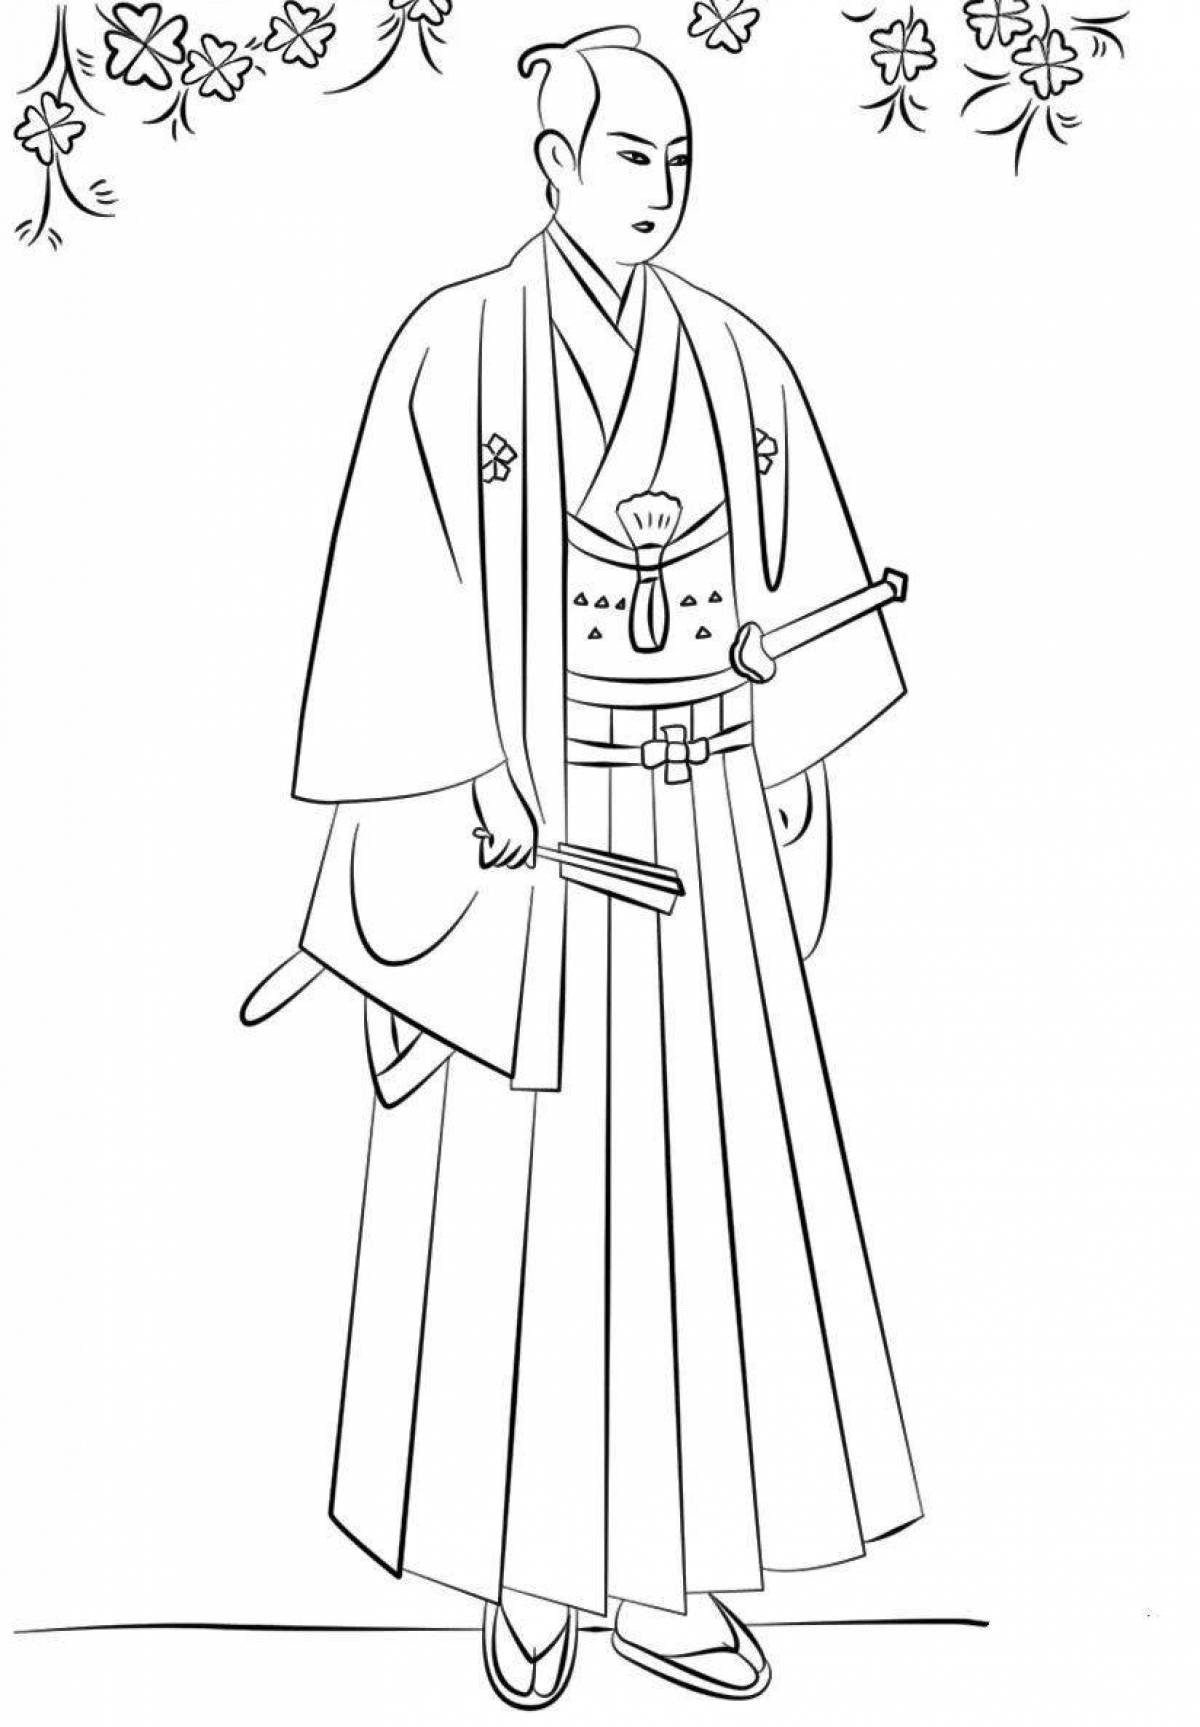 Fancy Japanese kimono coloring book for kids